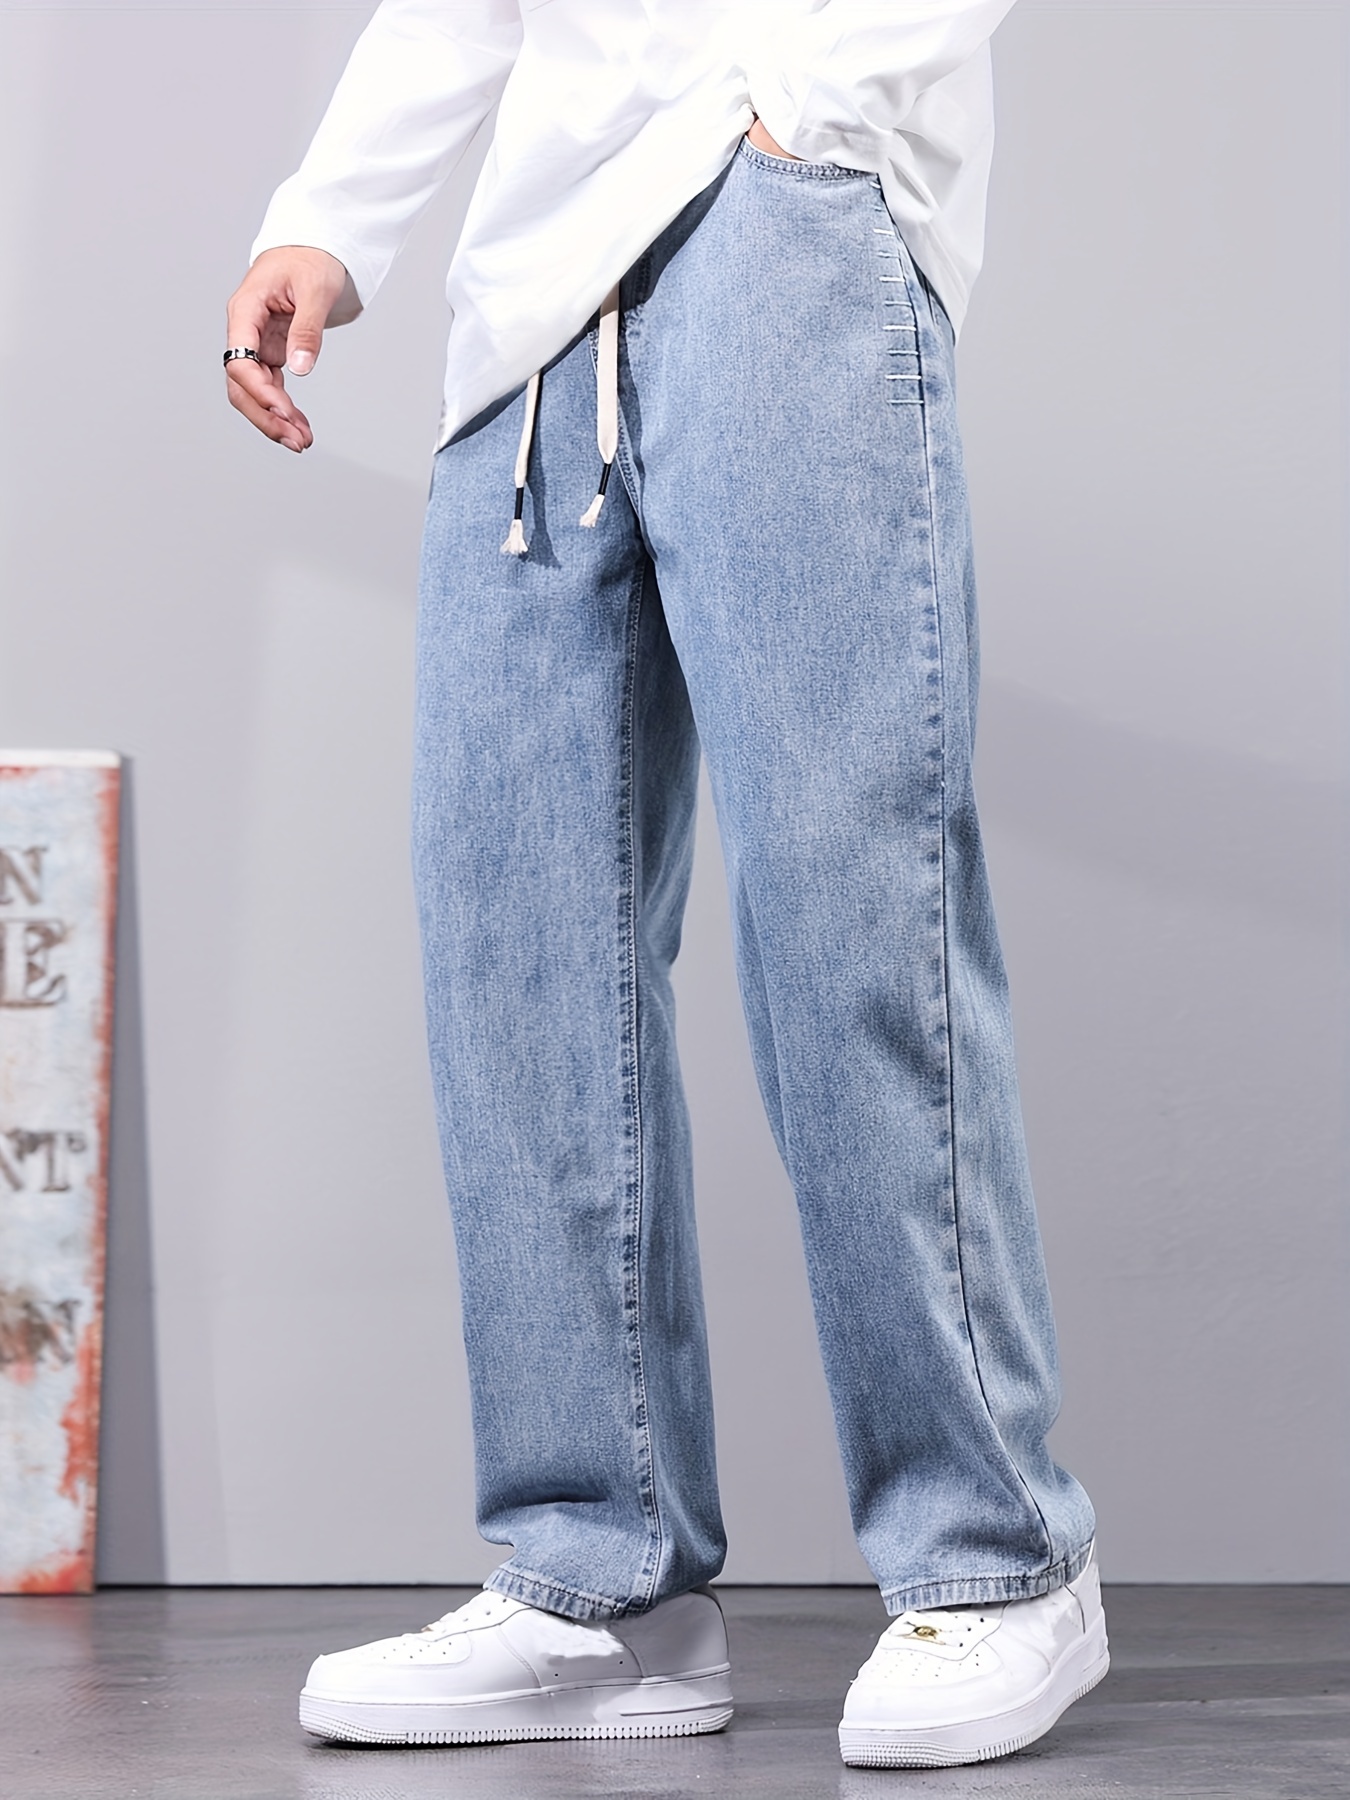 Classic Distressed Jean Sweatpants for Men Tapered Slim Fit Cotton Straight  Leg Ankle Length Denim Joggers with Pocket